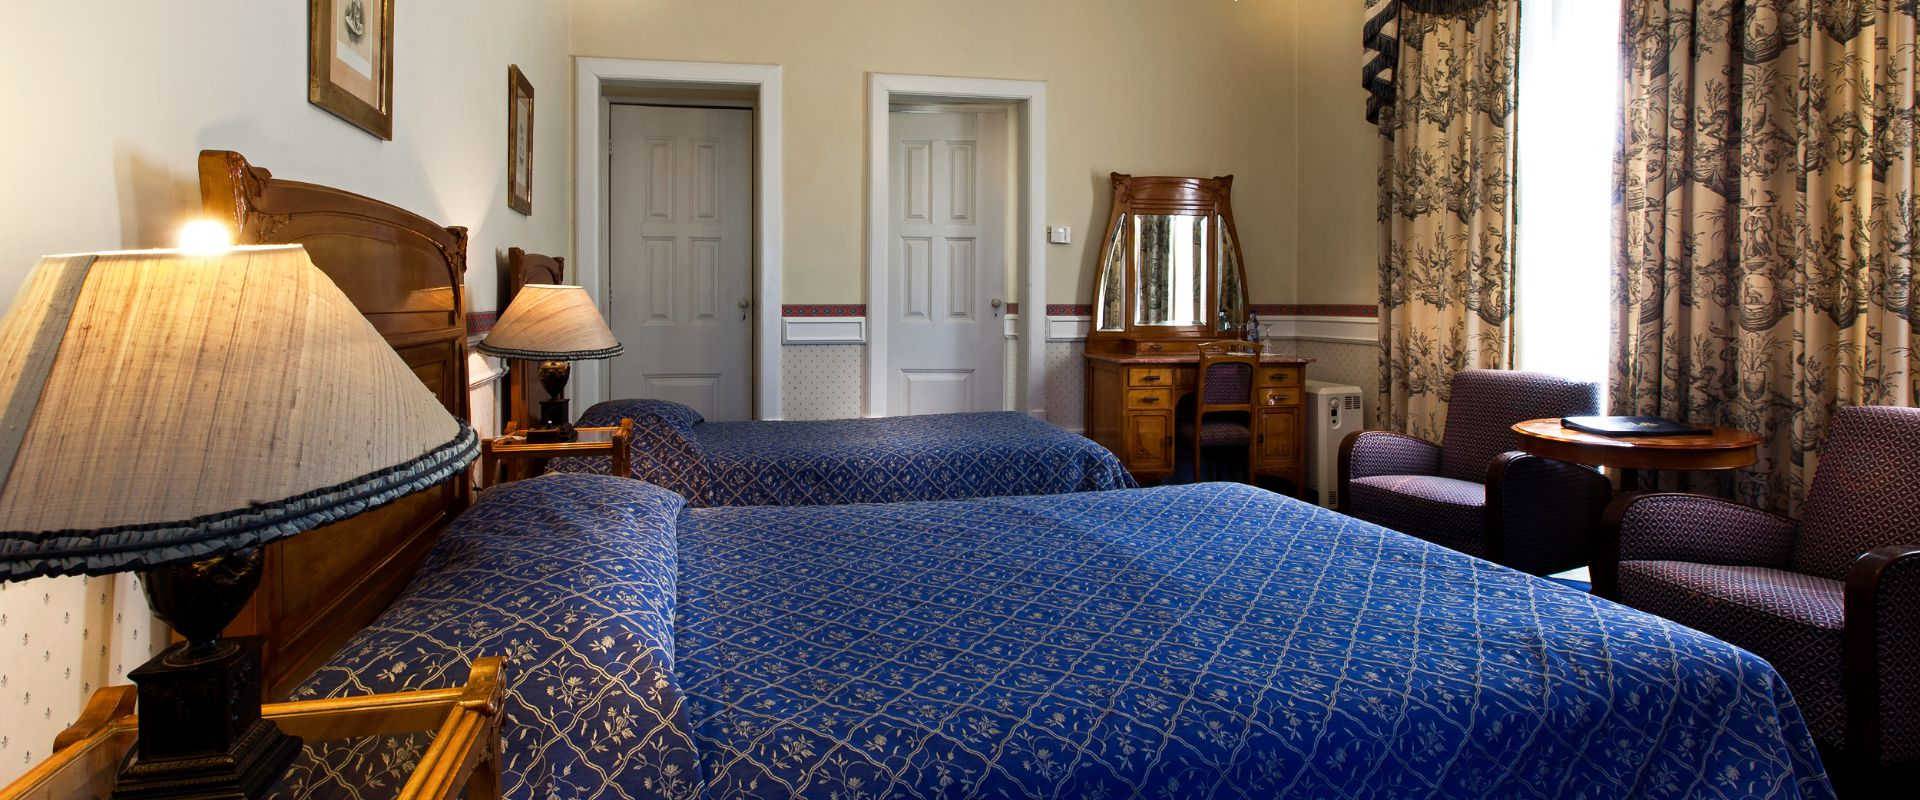 Classic room  Palace Hotel Bussaco Coimbra